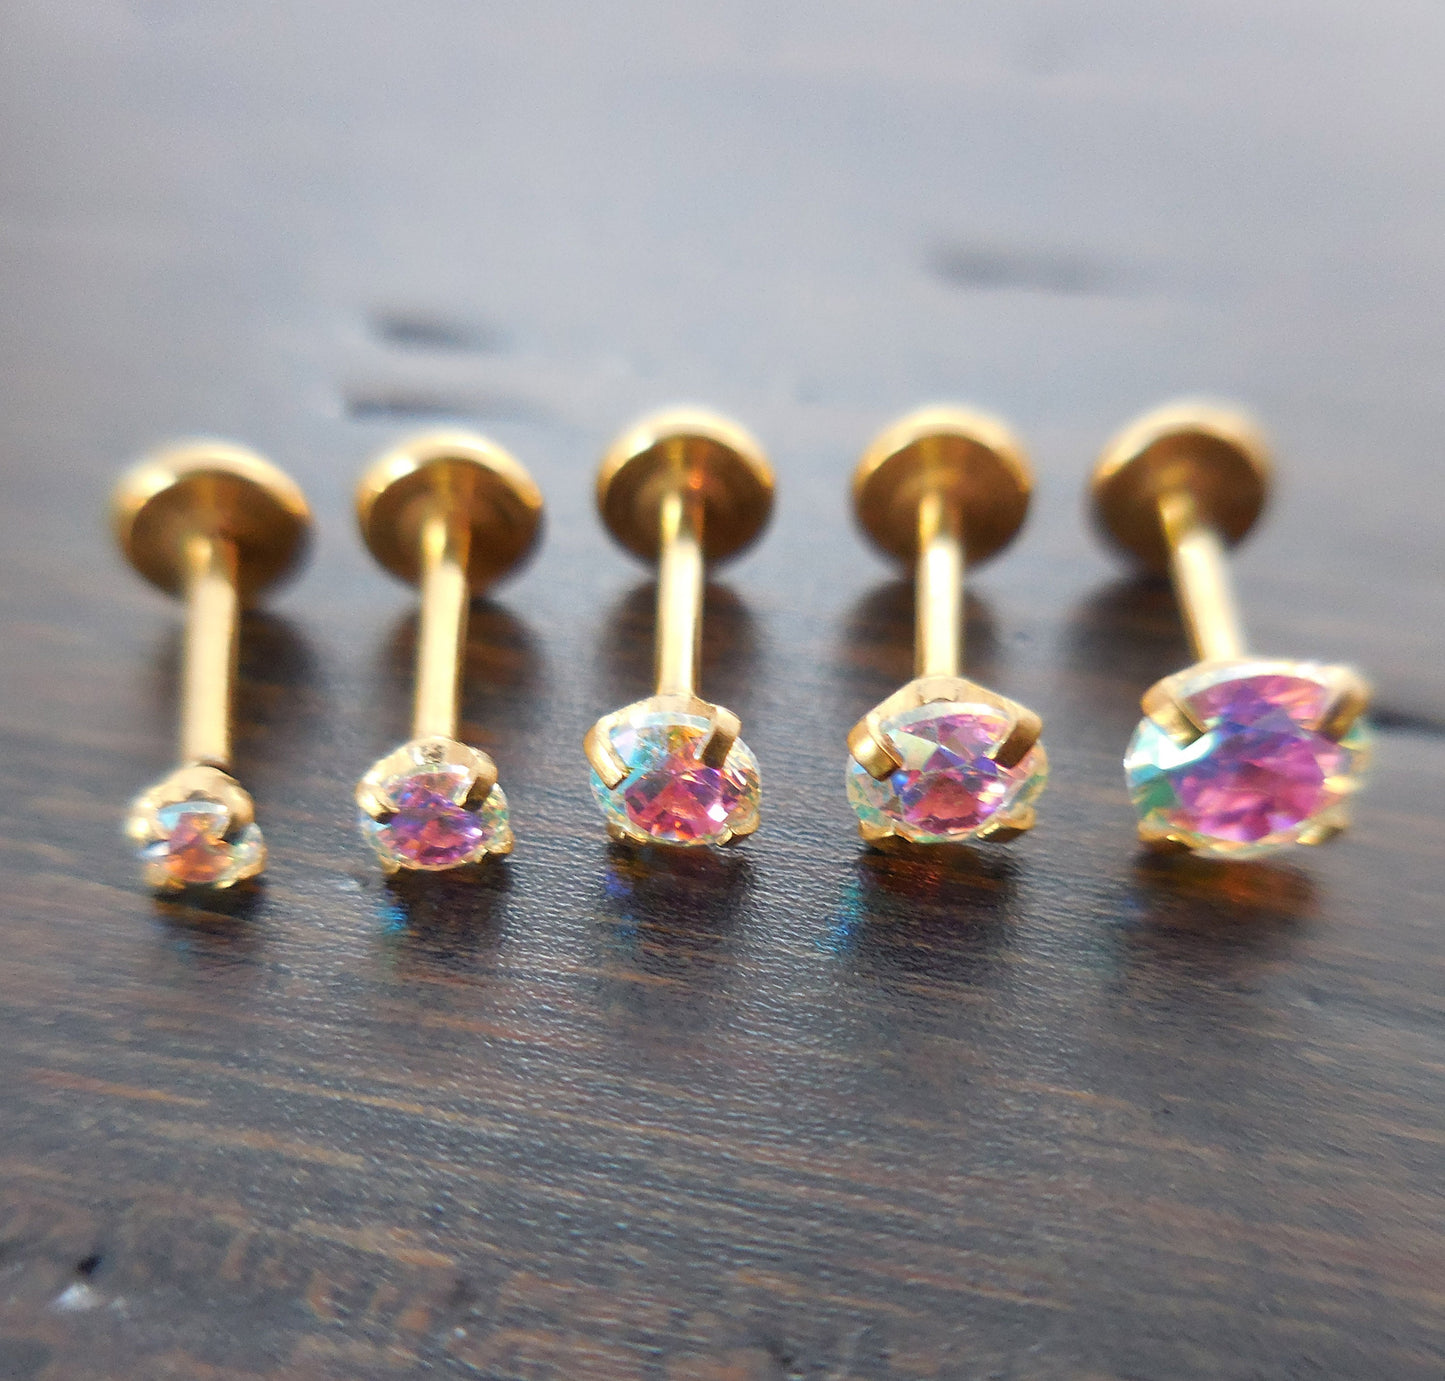 20g 2-4mm Labret Thread Less Triple Forward Helix Prong Set Tragus AB Crystal Push Pin 6mm-8mm Nose Ring Cartilage Earrings Gold Tone